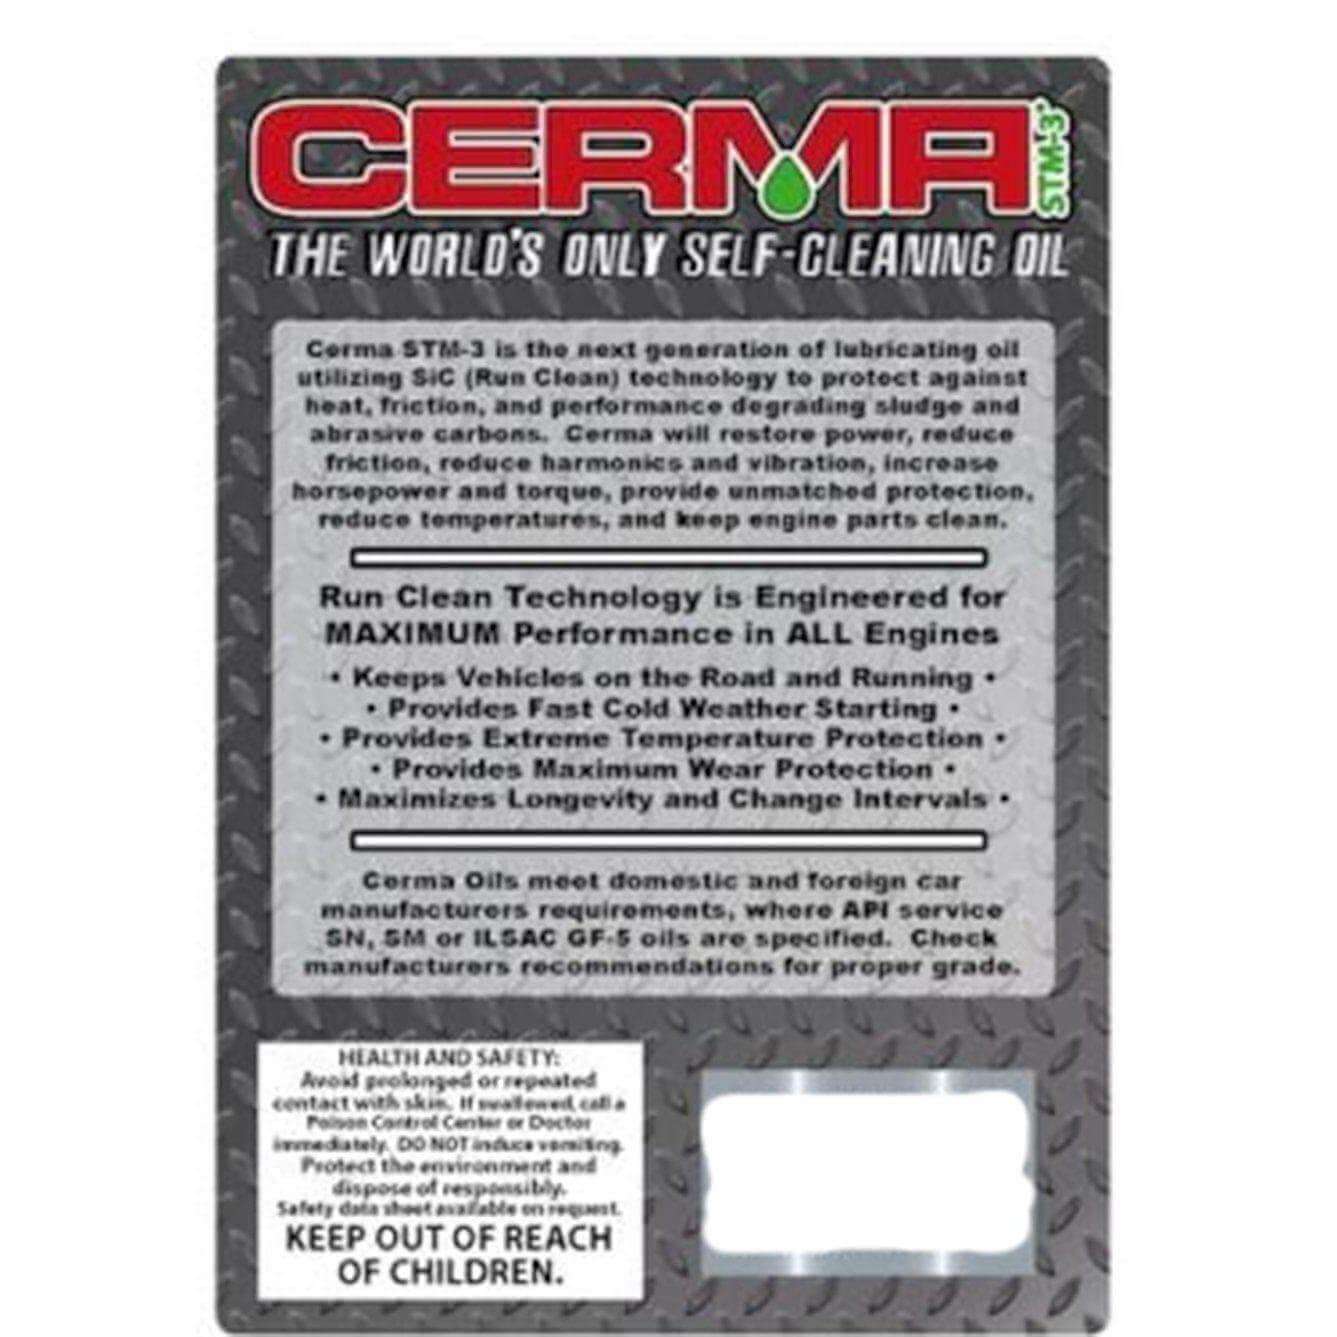 5W-20W Cerma Synthetic Ceramic Motor Oil at $12.95 only from cermatreatment.com